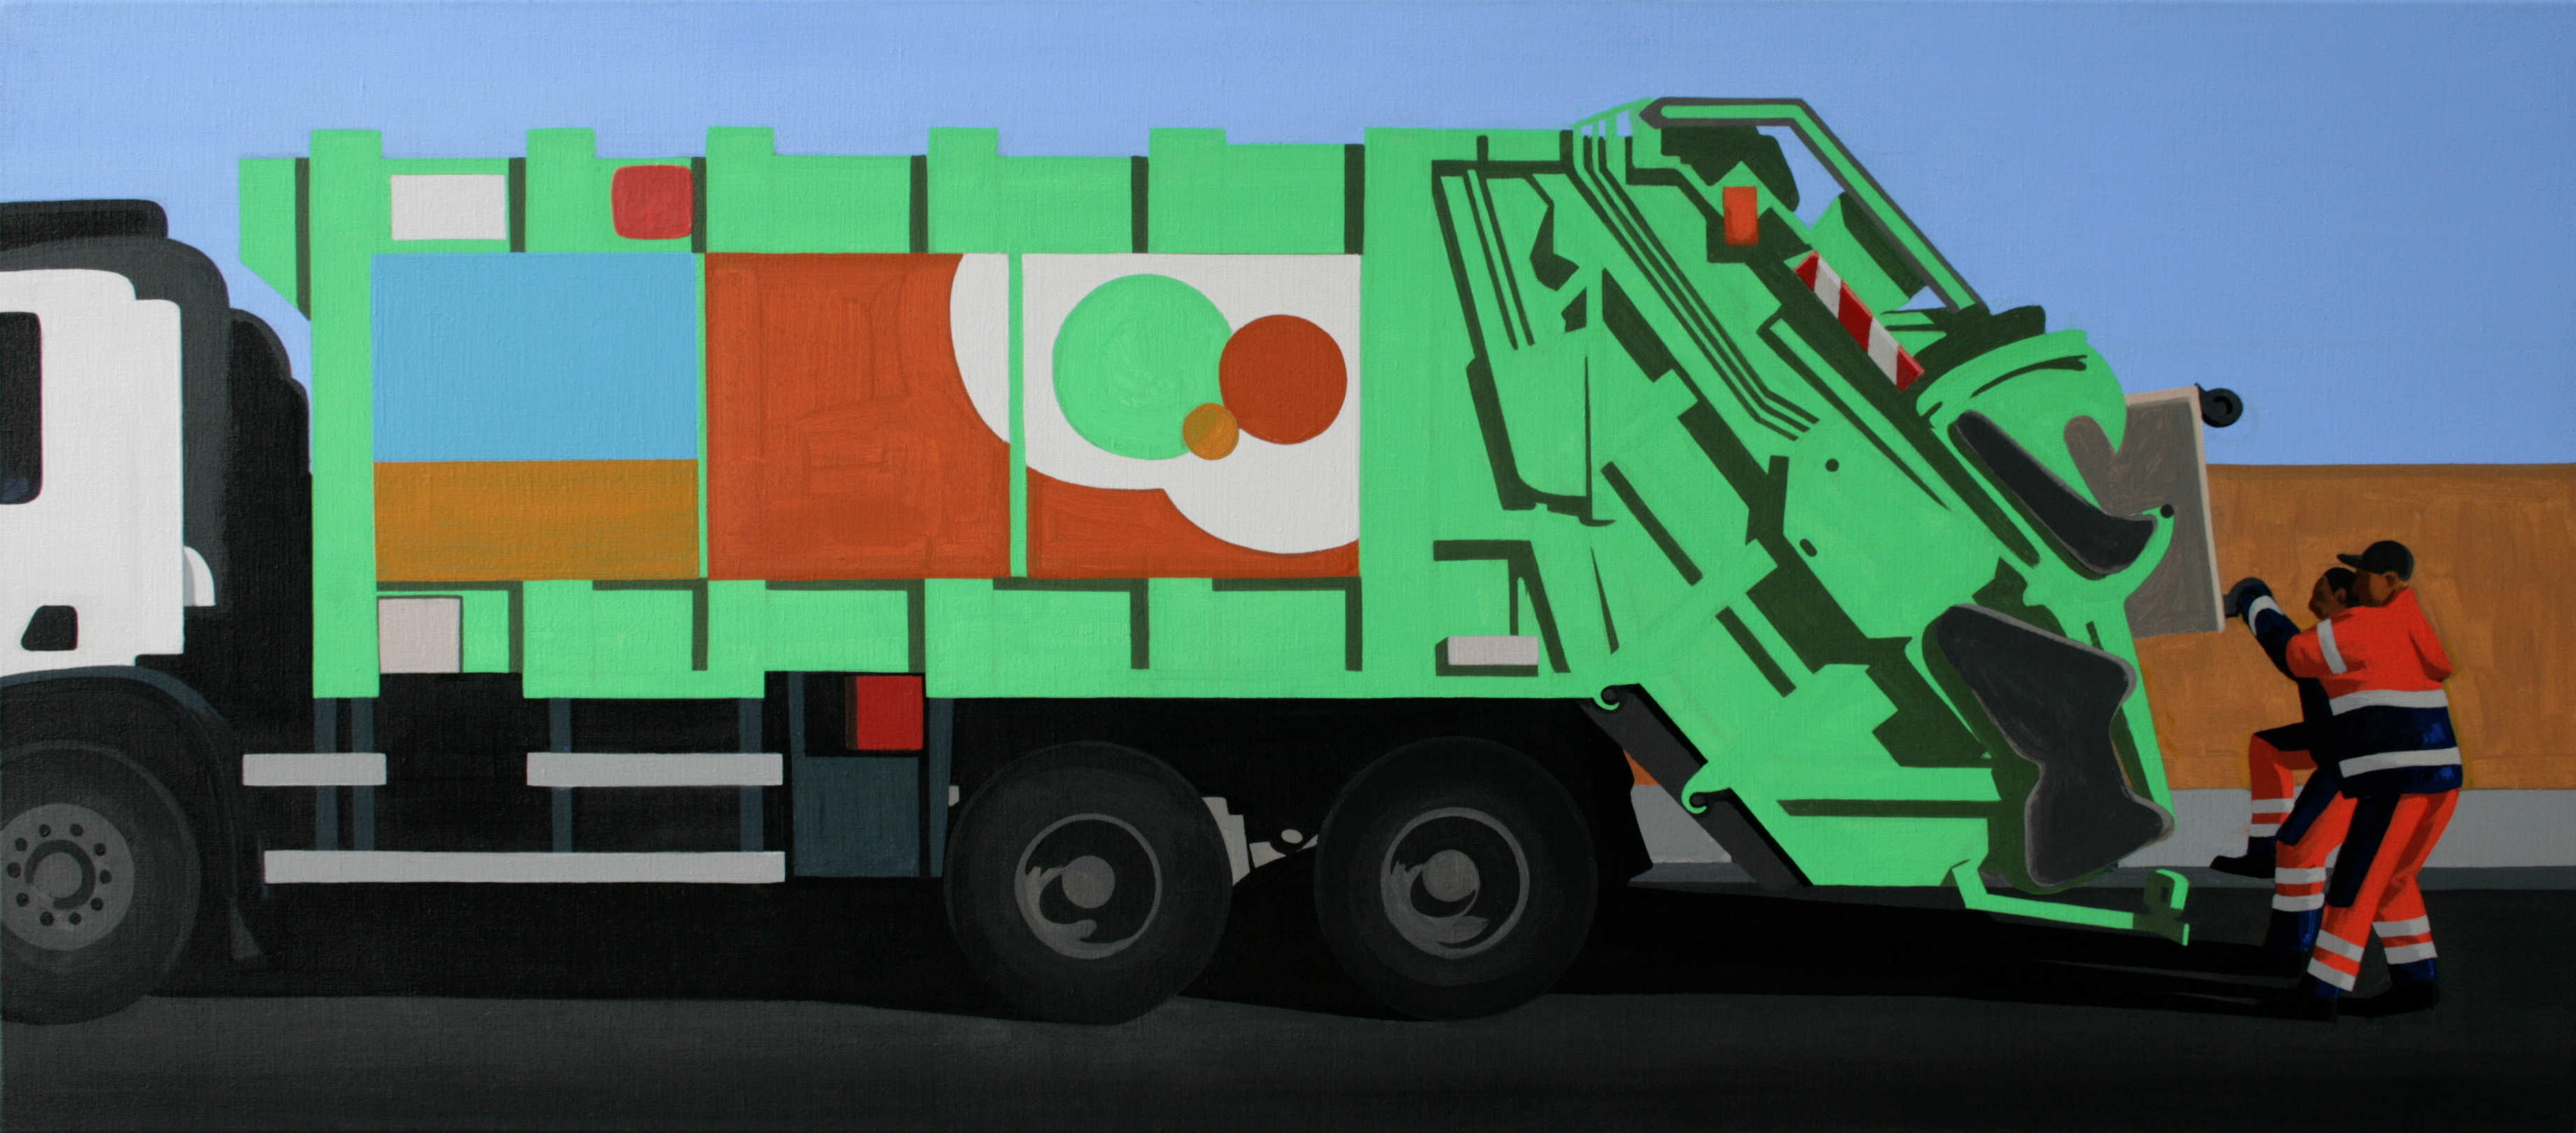 Garbagetruck 2012 Acrylic on Canvas 55 X 125
                cm/21,65 X 49,21 Inches